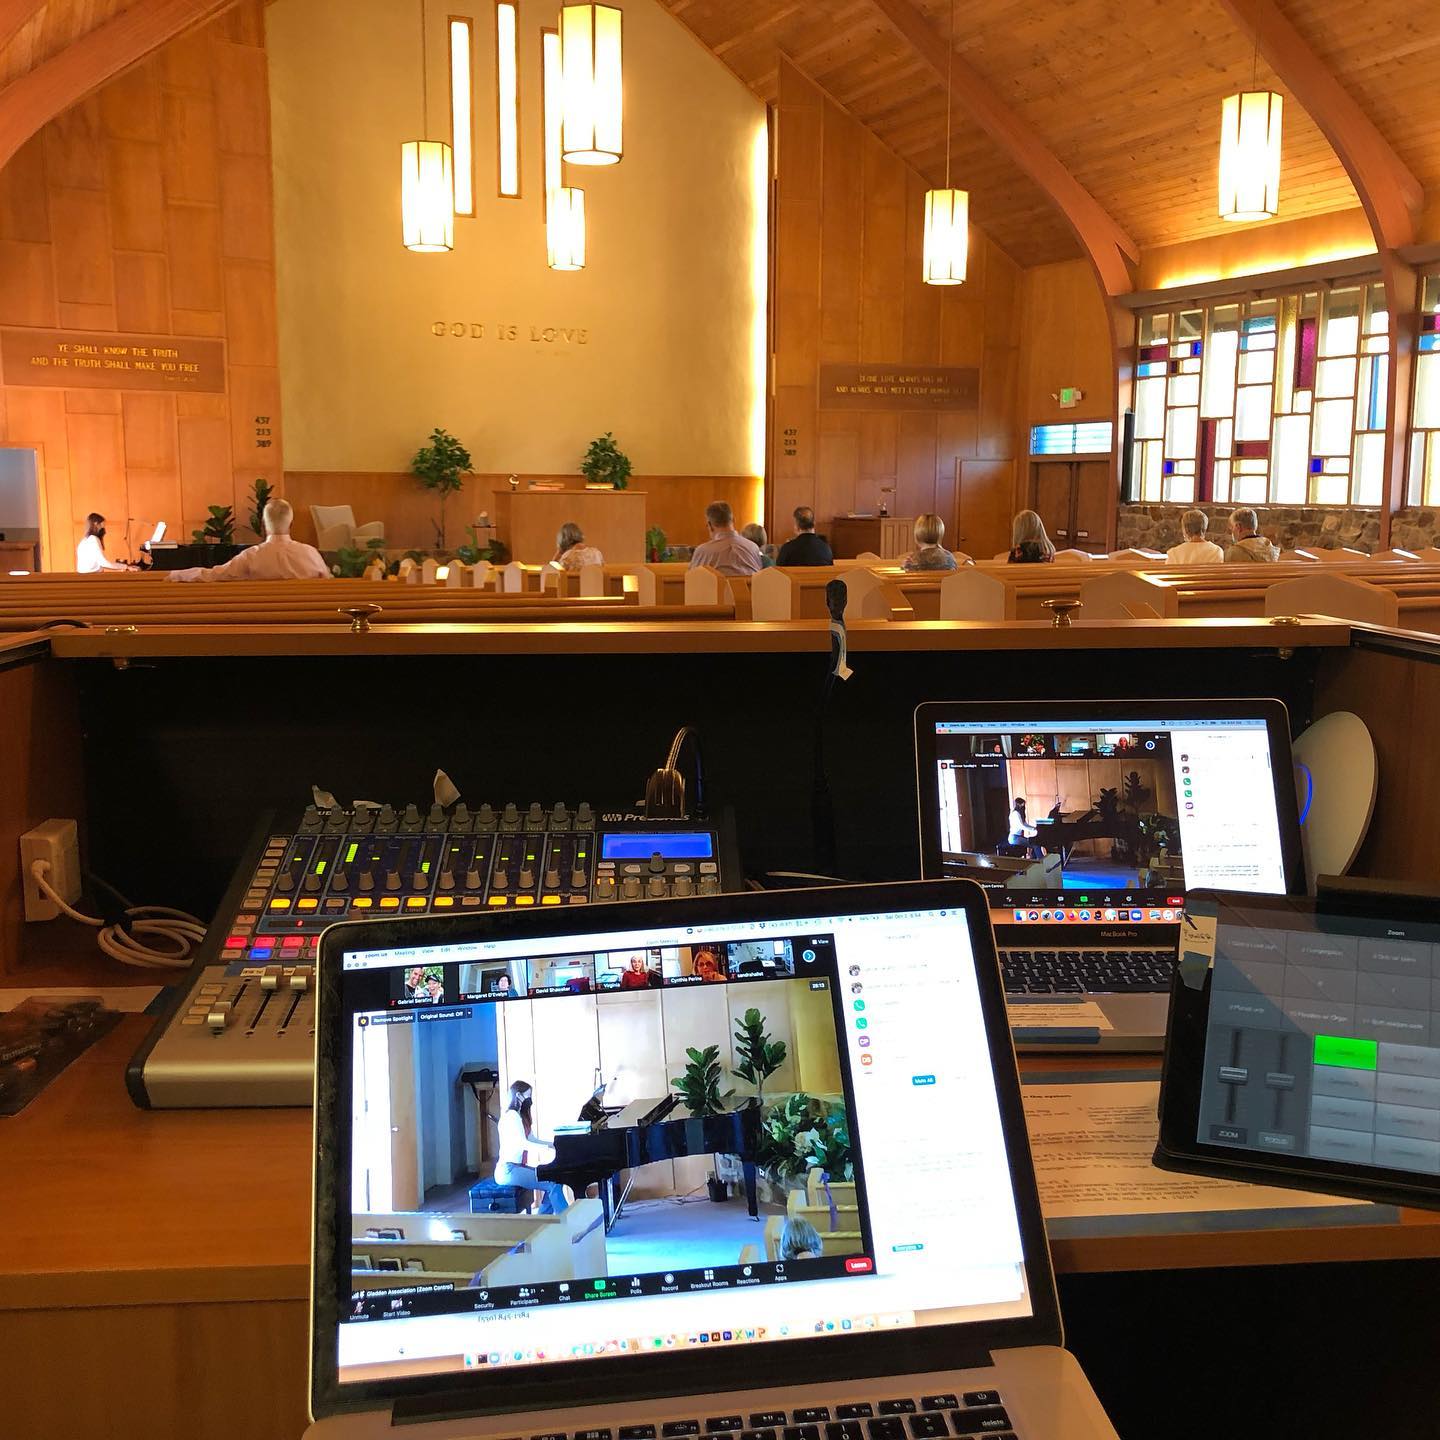 My office this morning – Zoom techi for the Gladden Association at the beautiful First Church of Christ, Scientist, Palo Alto